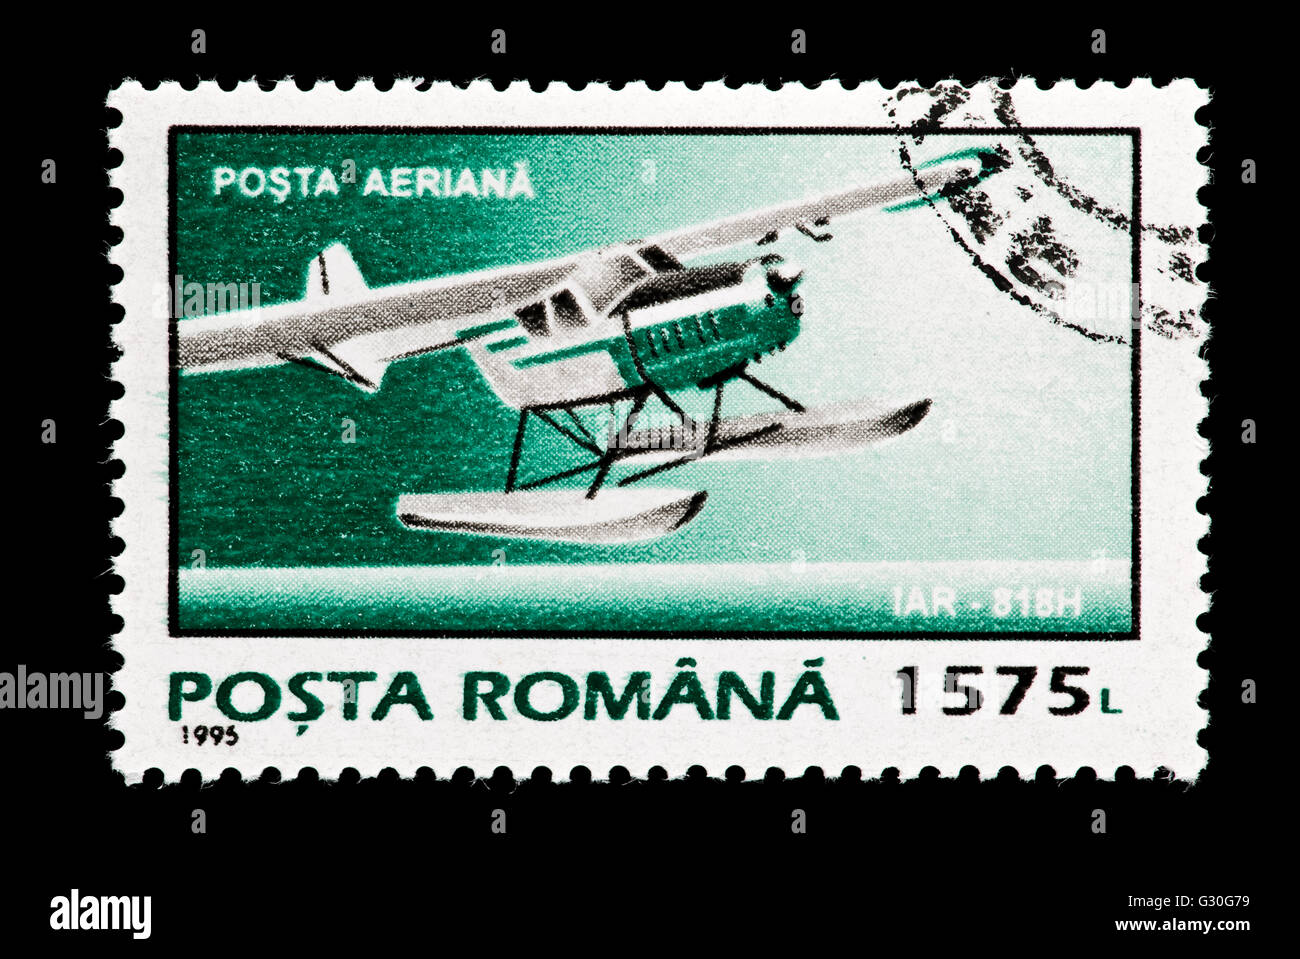 Postage stamp from Romania depicting an IAR-818H seaplane Stock Photo